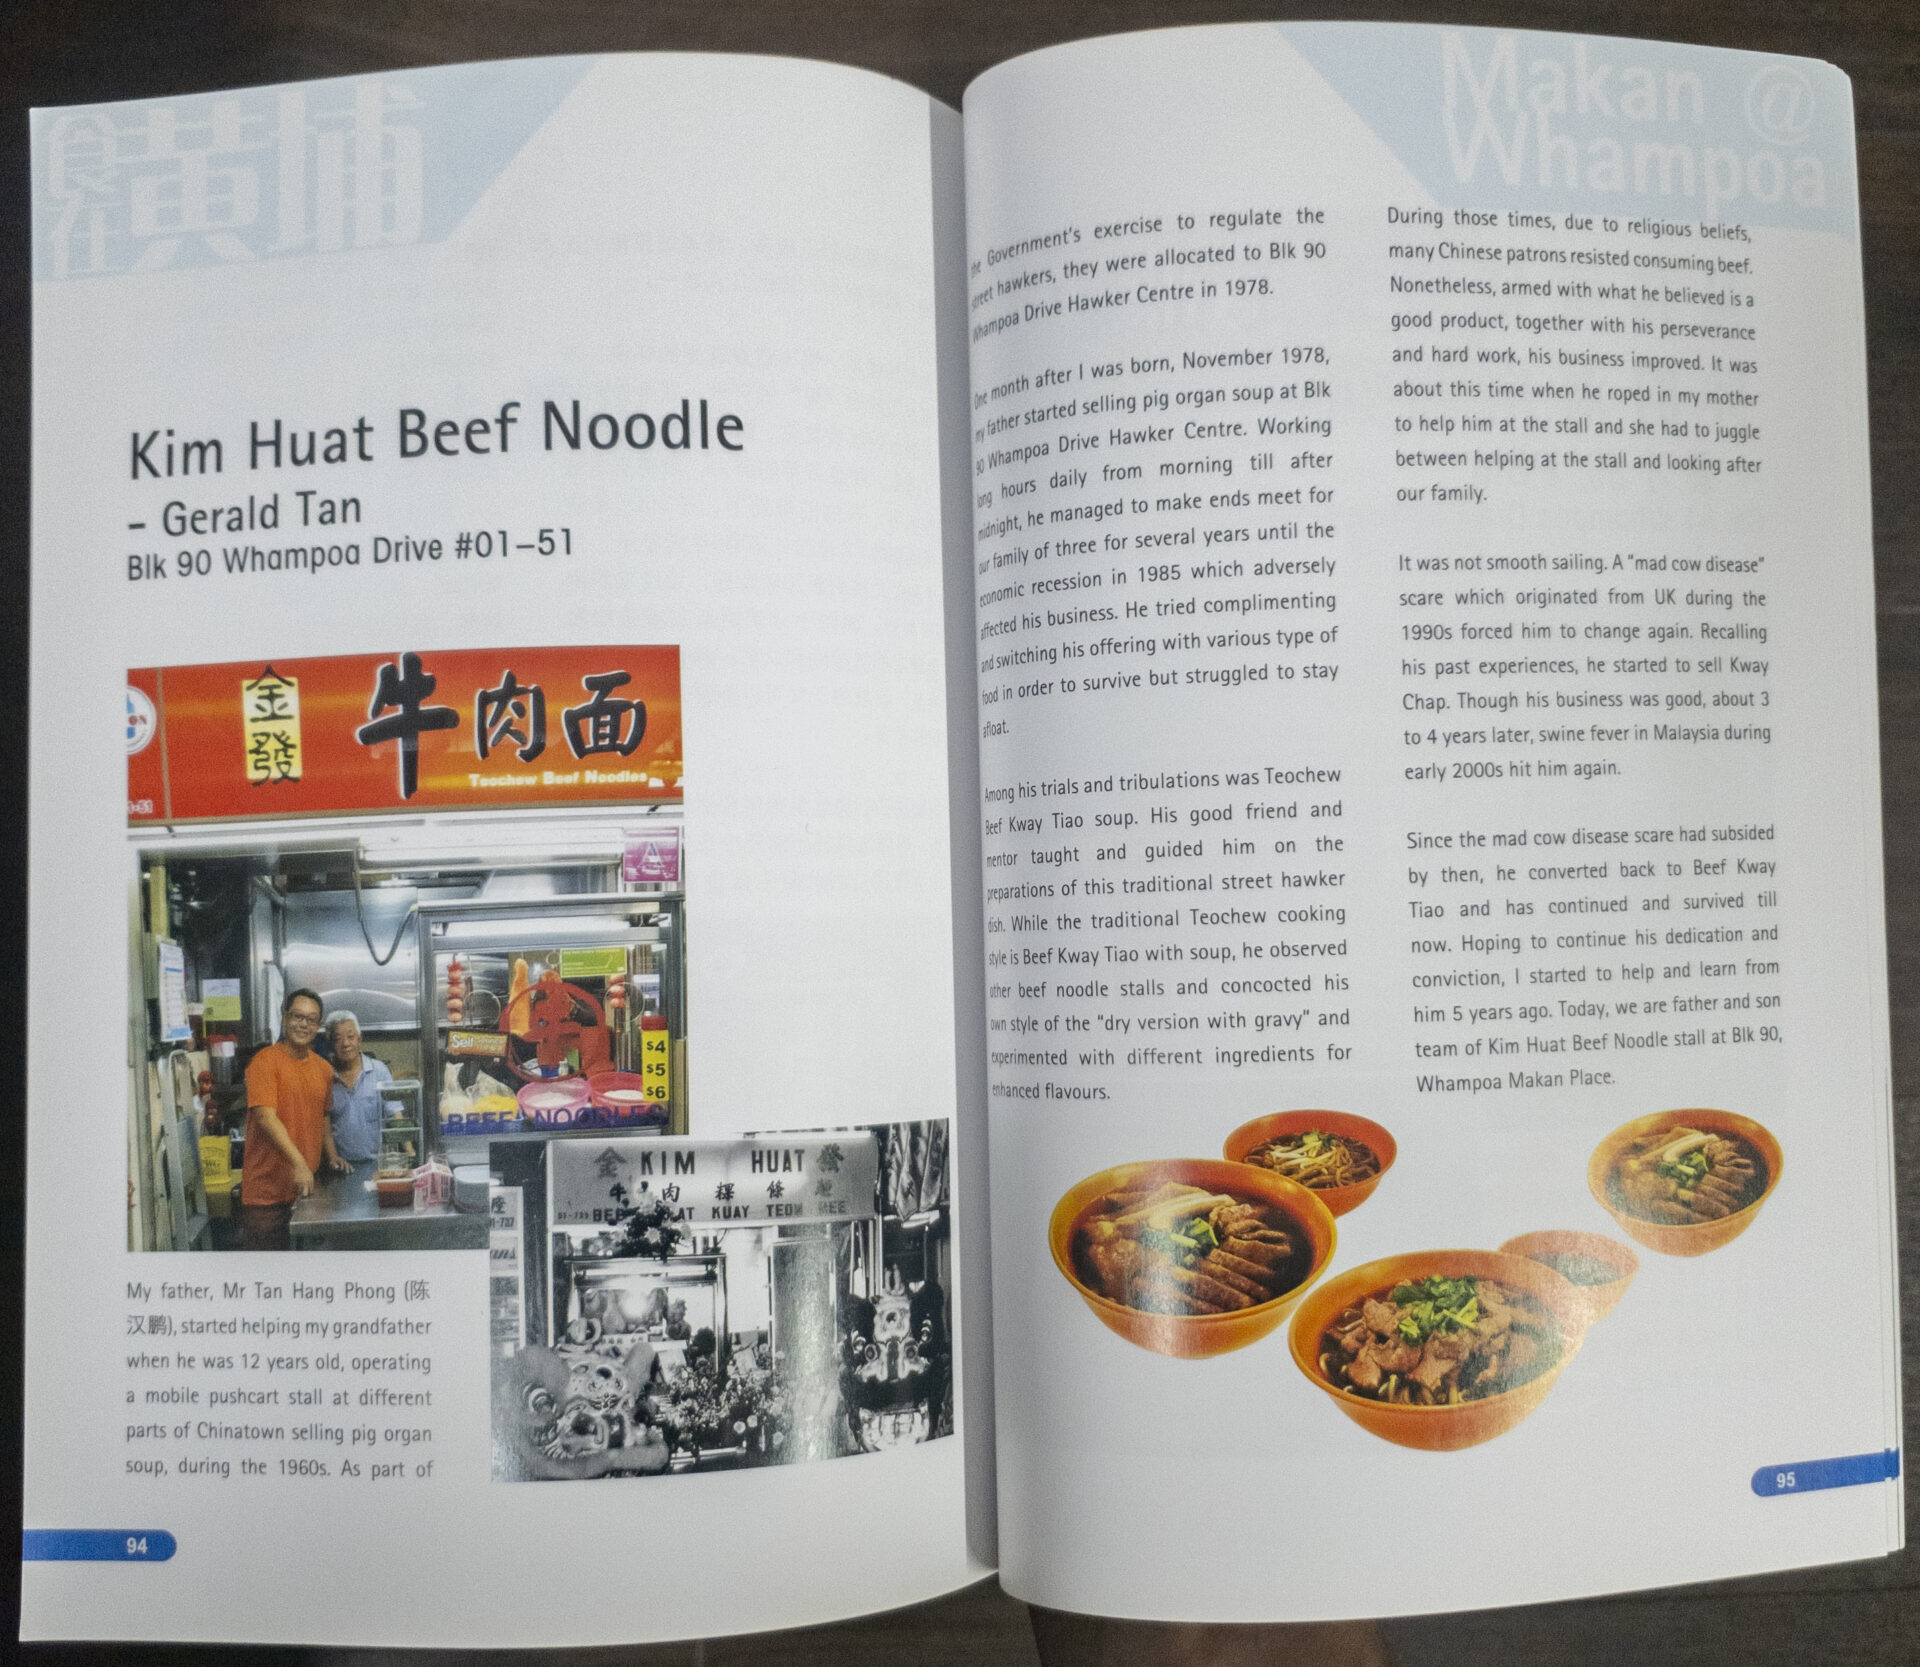 Kim Huat Teochew Beef Noodles - Book pages